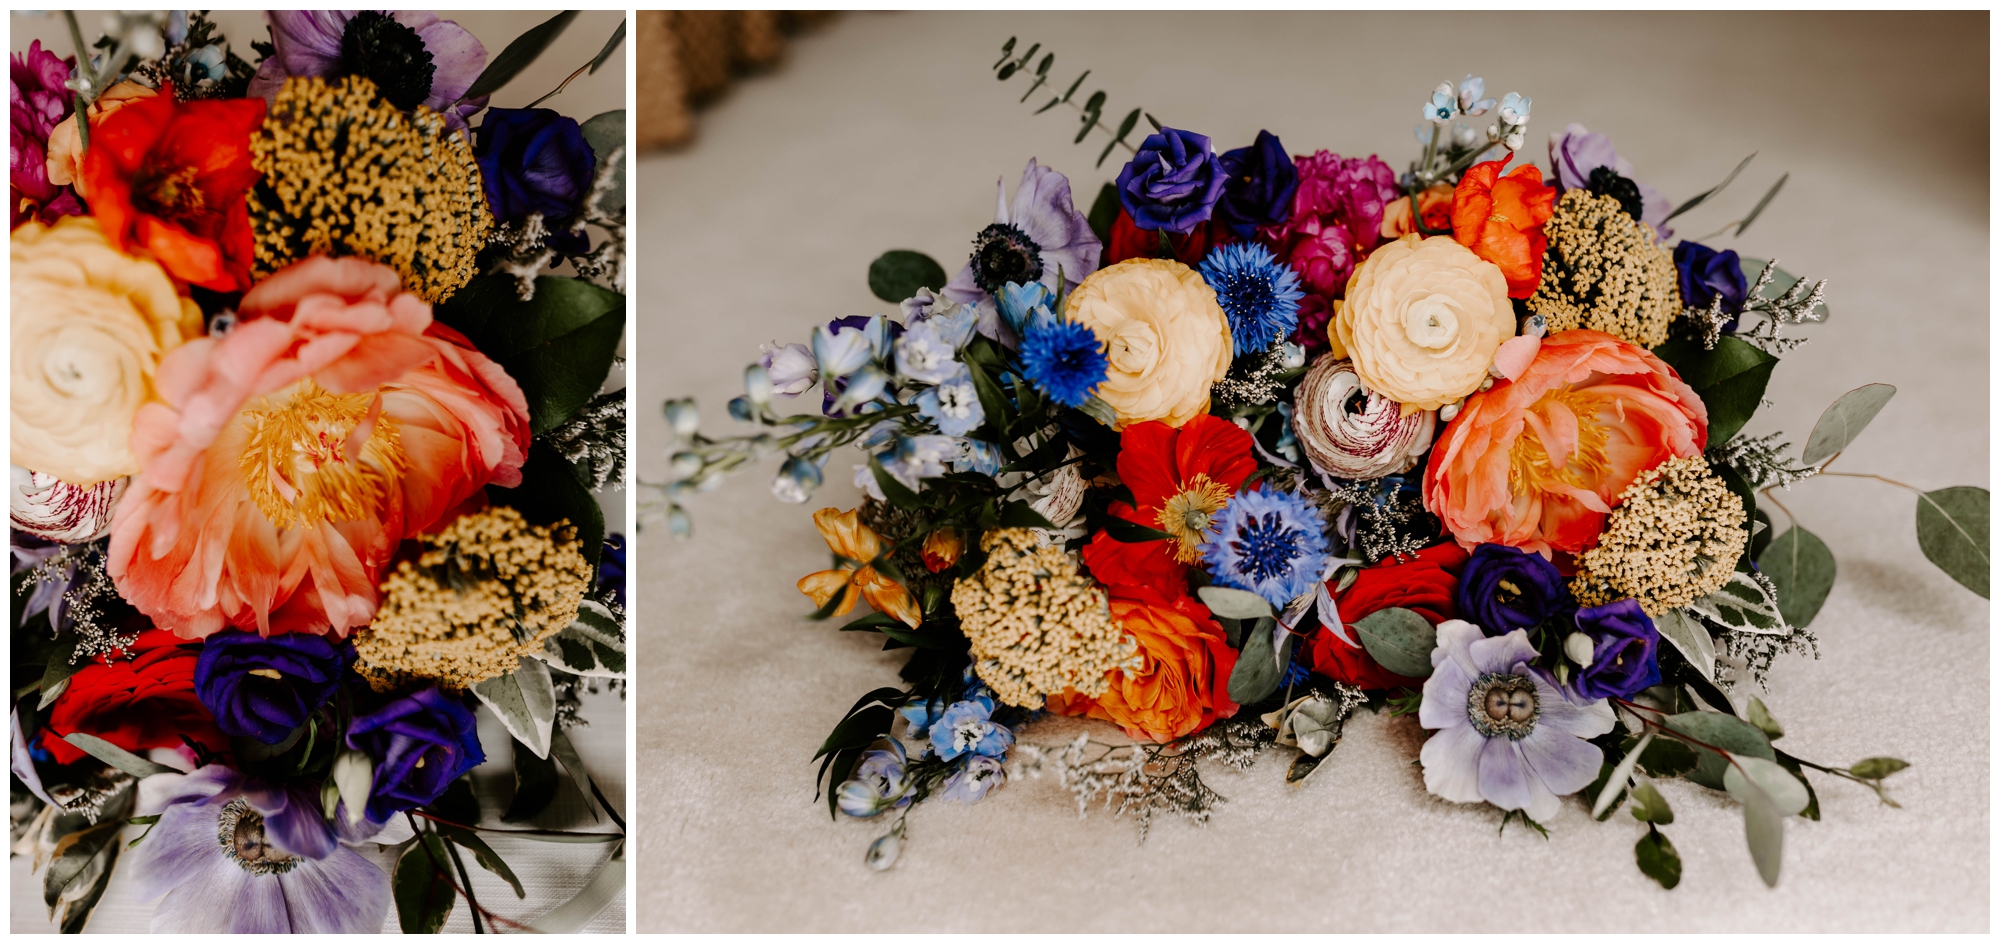 Wedding Day florals by The Farmer's Daughter, Pittsburgh